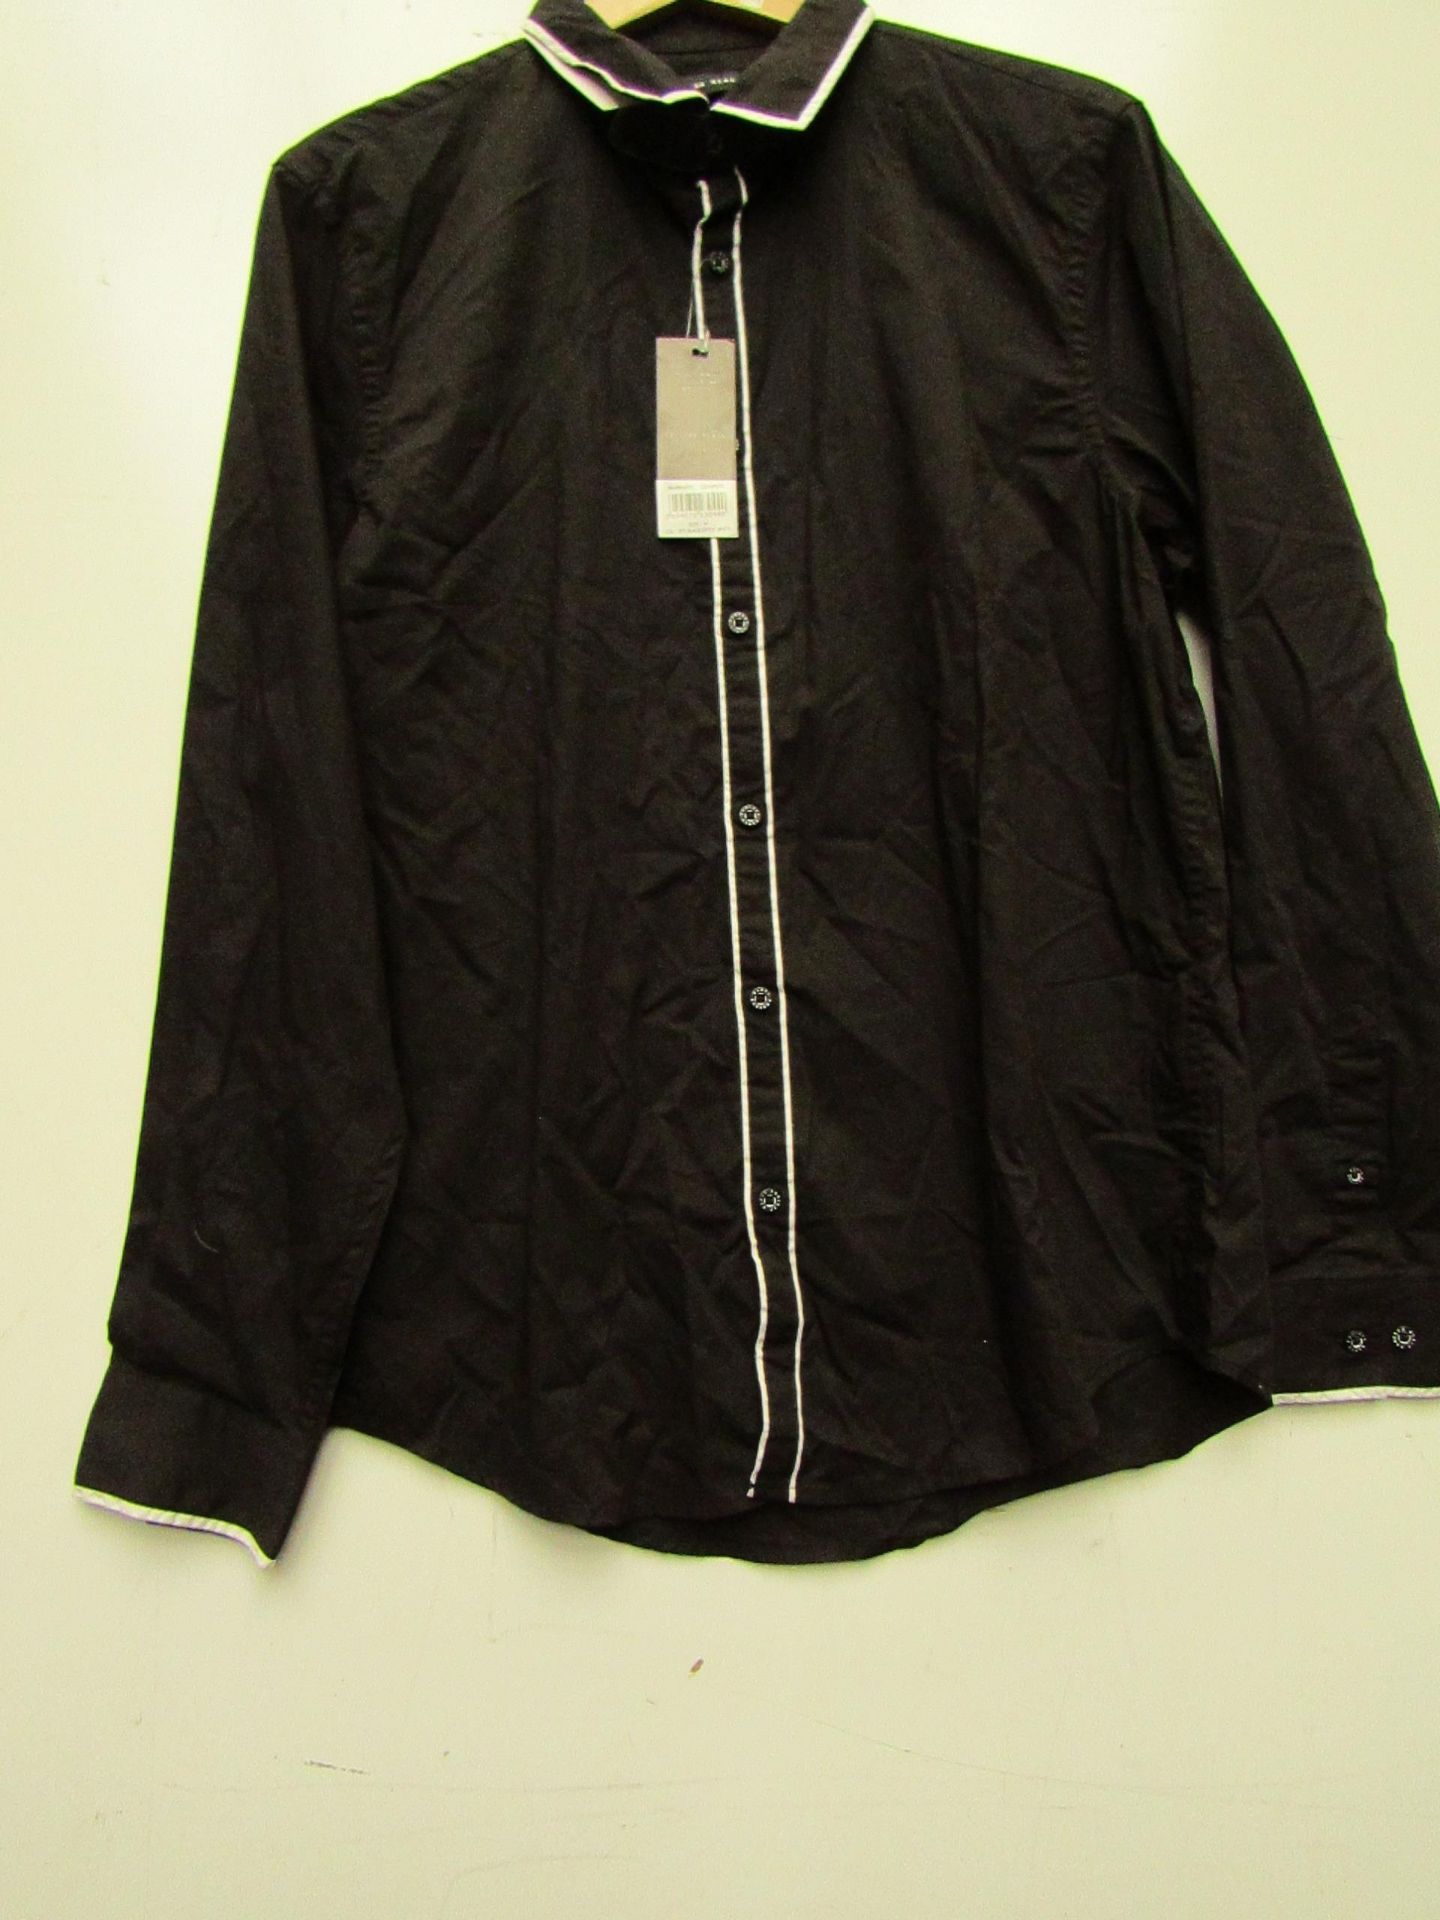 Process Black Mens Long Sleeve Shirt size M with tag see image